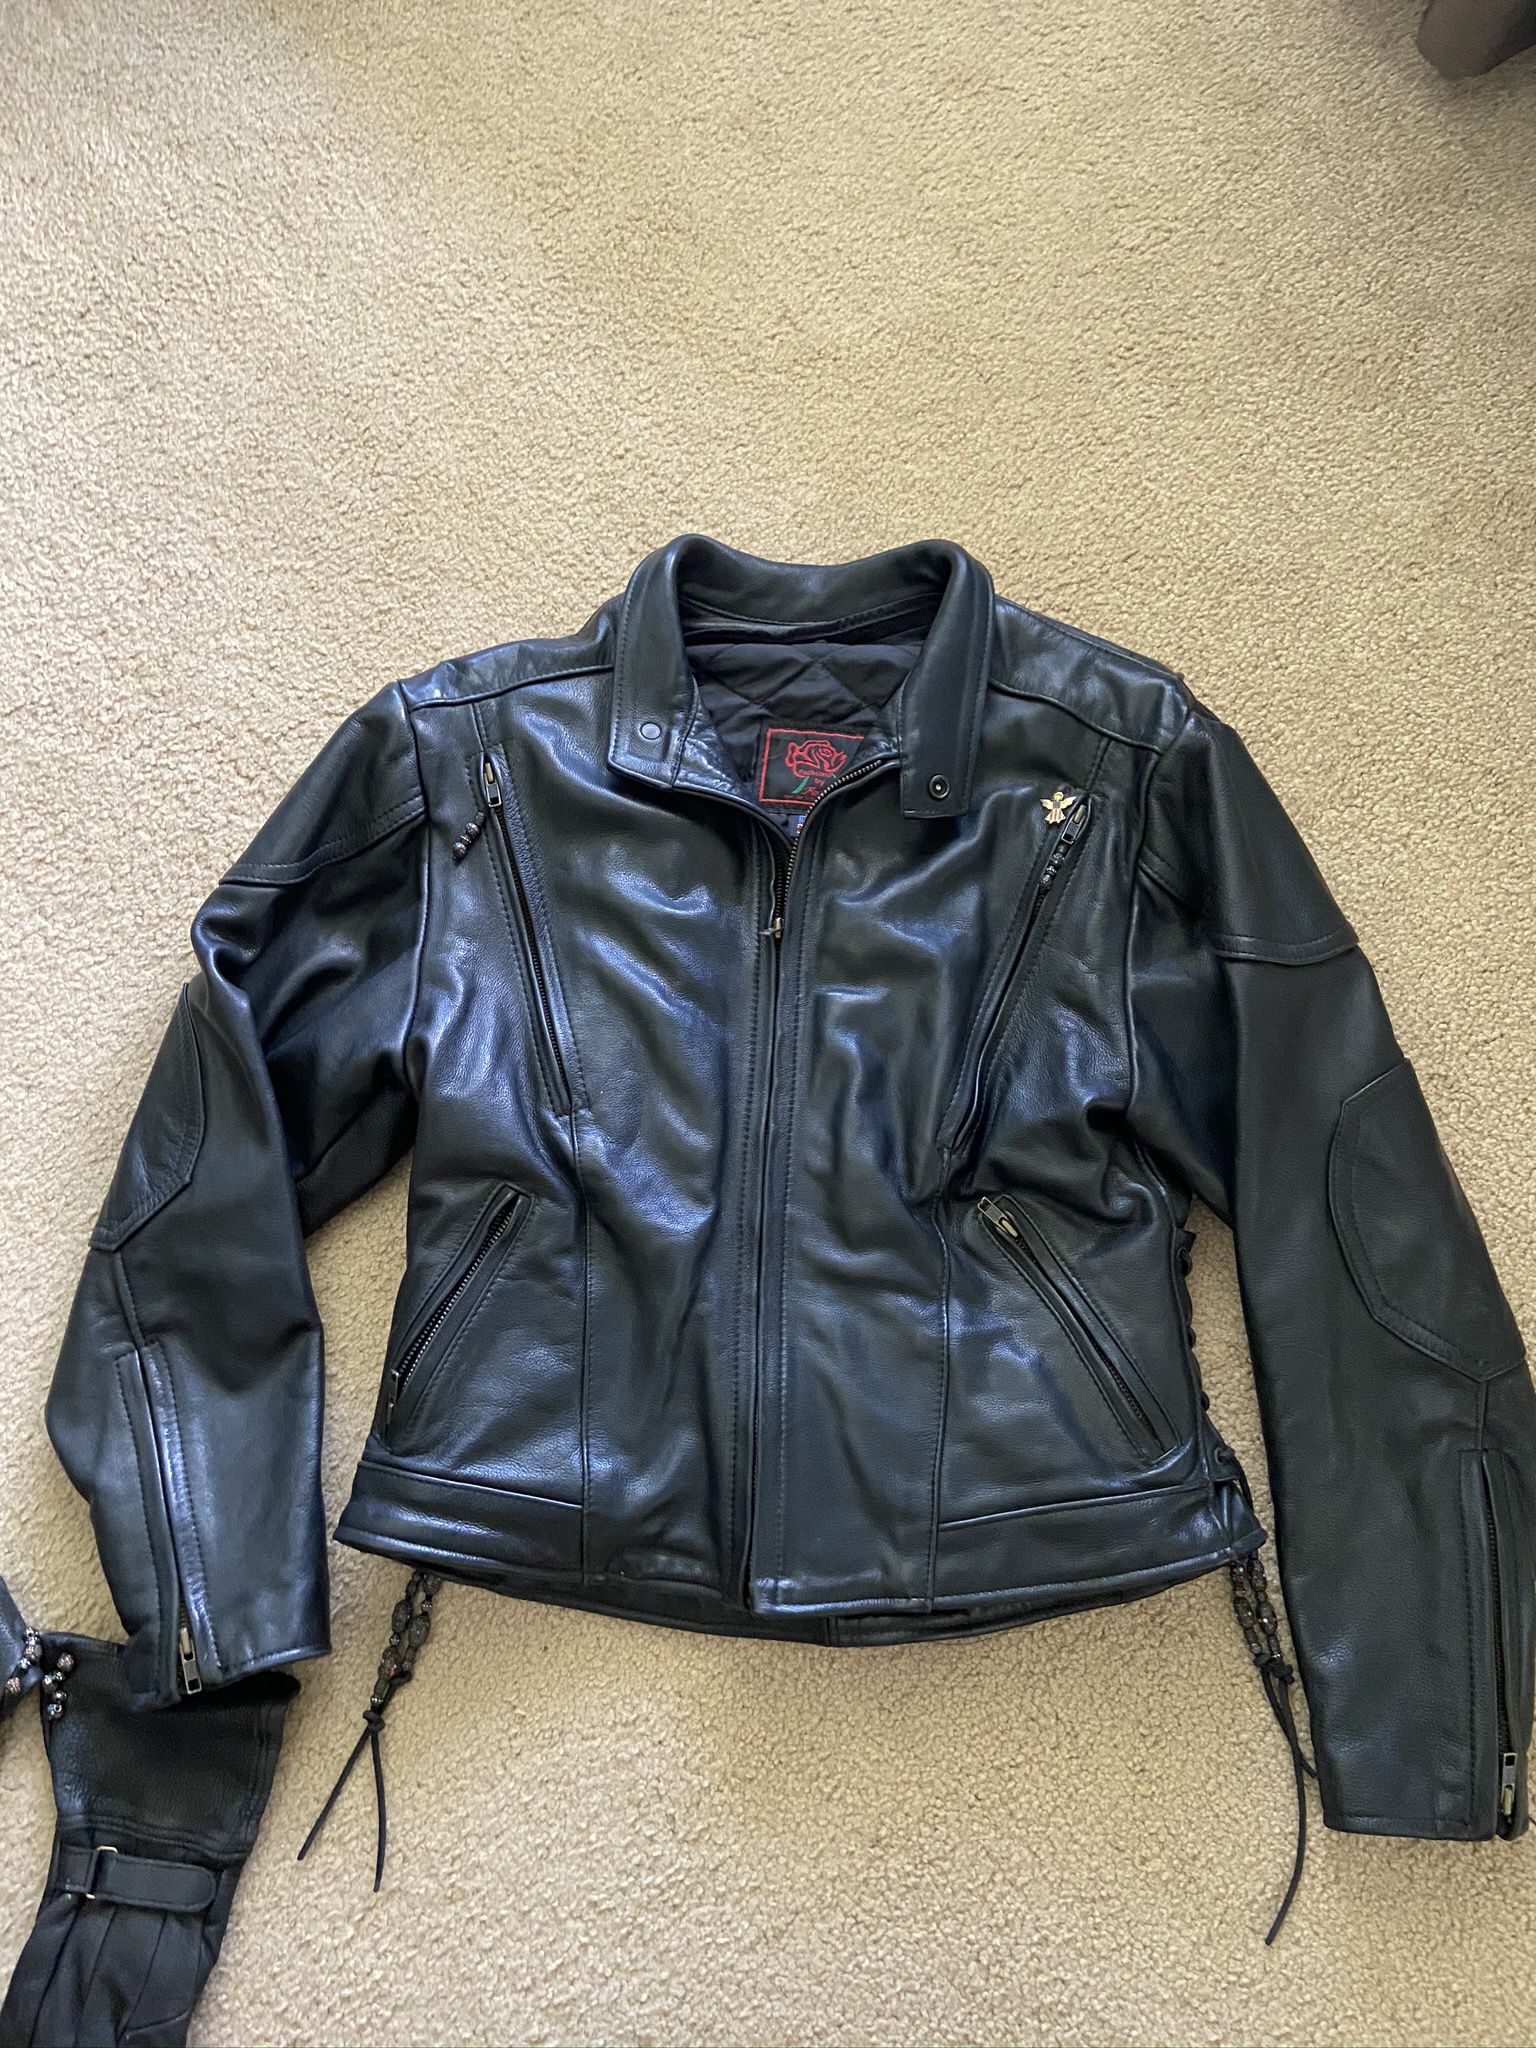 Women Size Large Heavy Motorcycle Jacket With Removable Liner, Chaps and Gloves